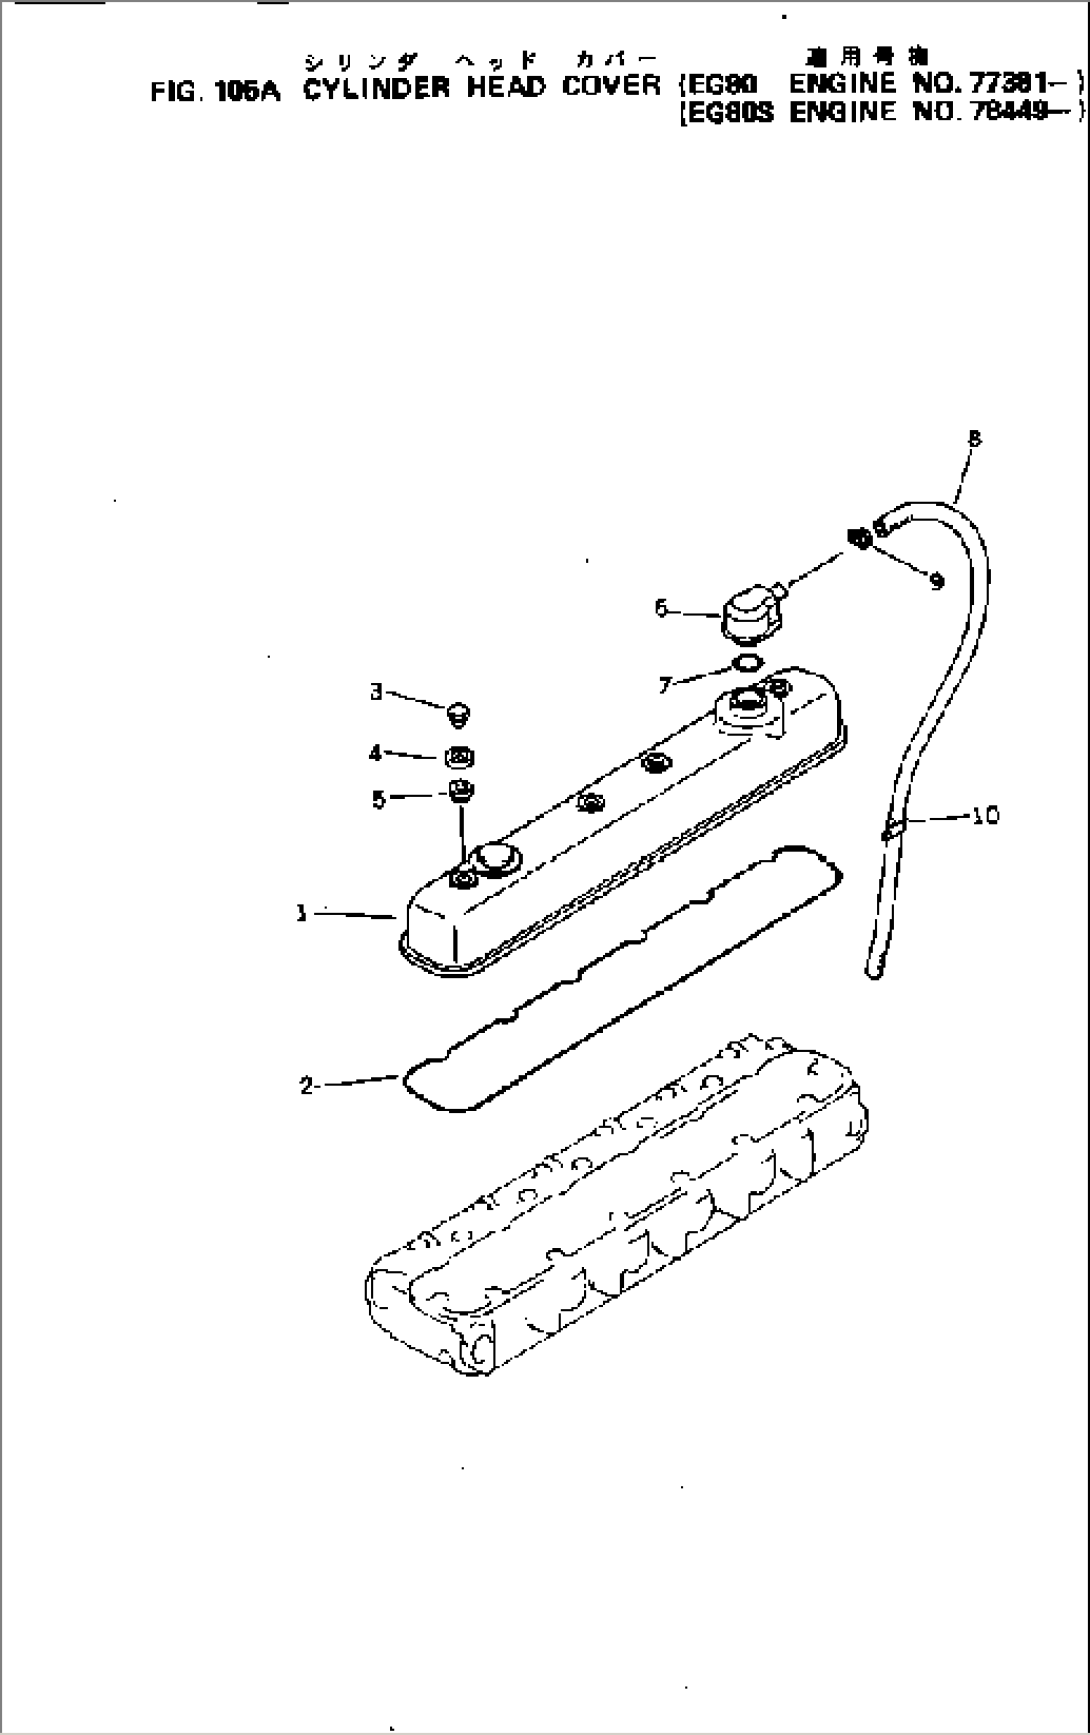 CYLINDER HEAD COVER(#77381-)